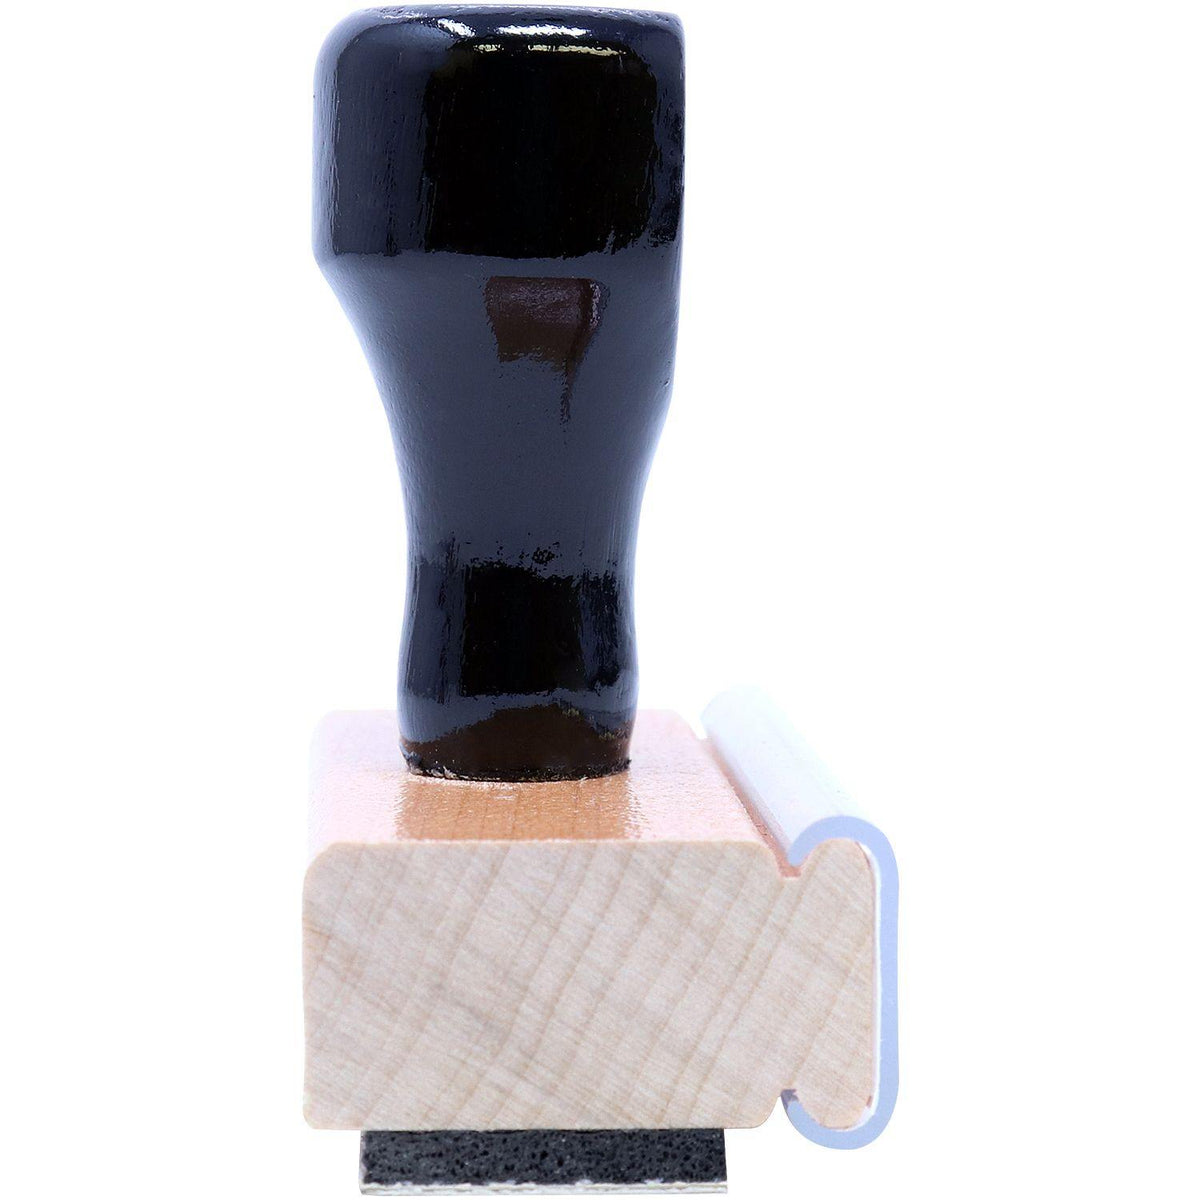 Side View of Large Medi Cal Rubber Stamp